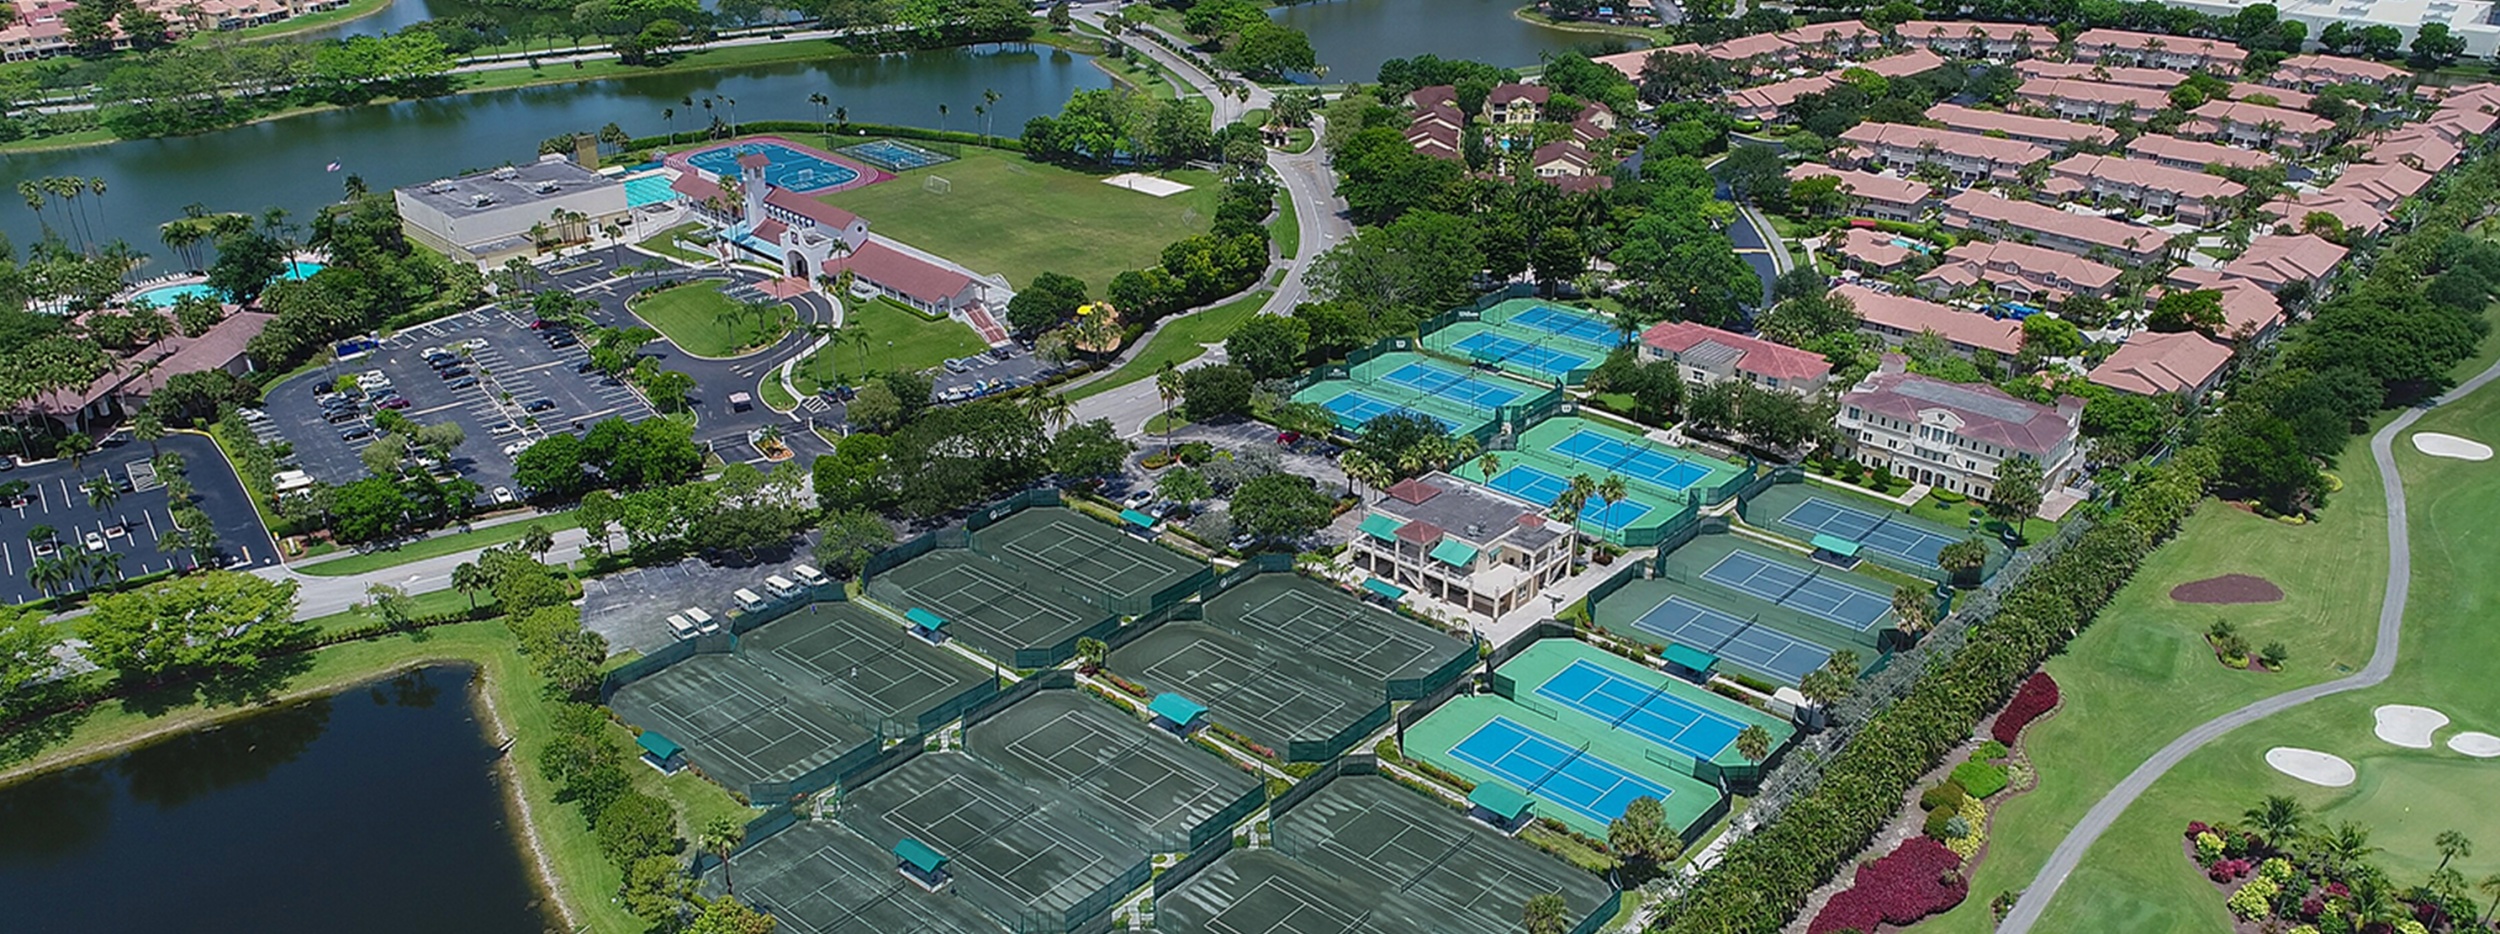 Our Tennis Training Facilities